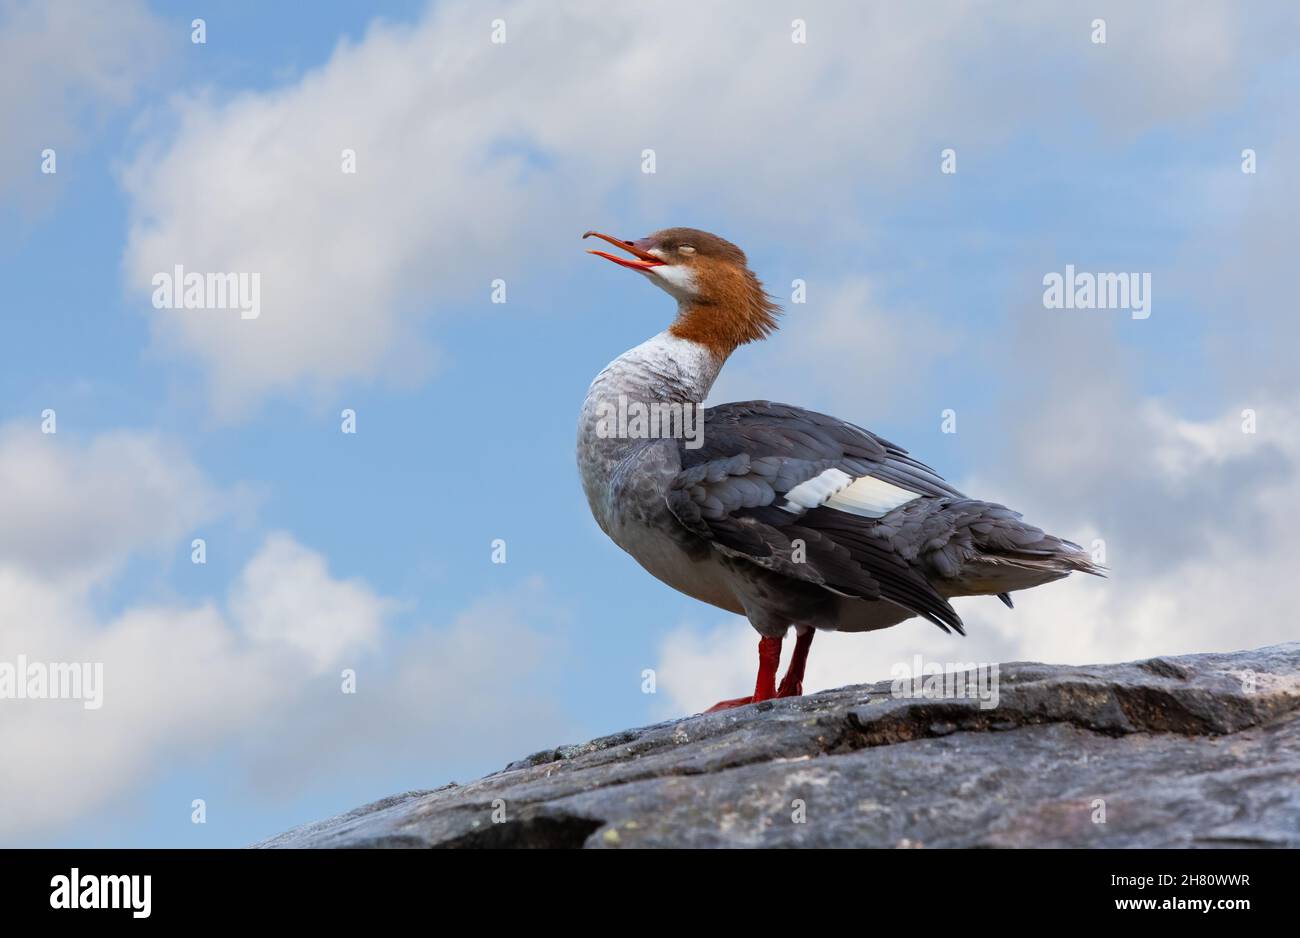 Female goosander standing on a cliff, holding head up.  Blue sky and clouds in the background. Mergus merganser. Stock Photo